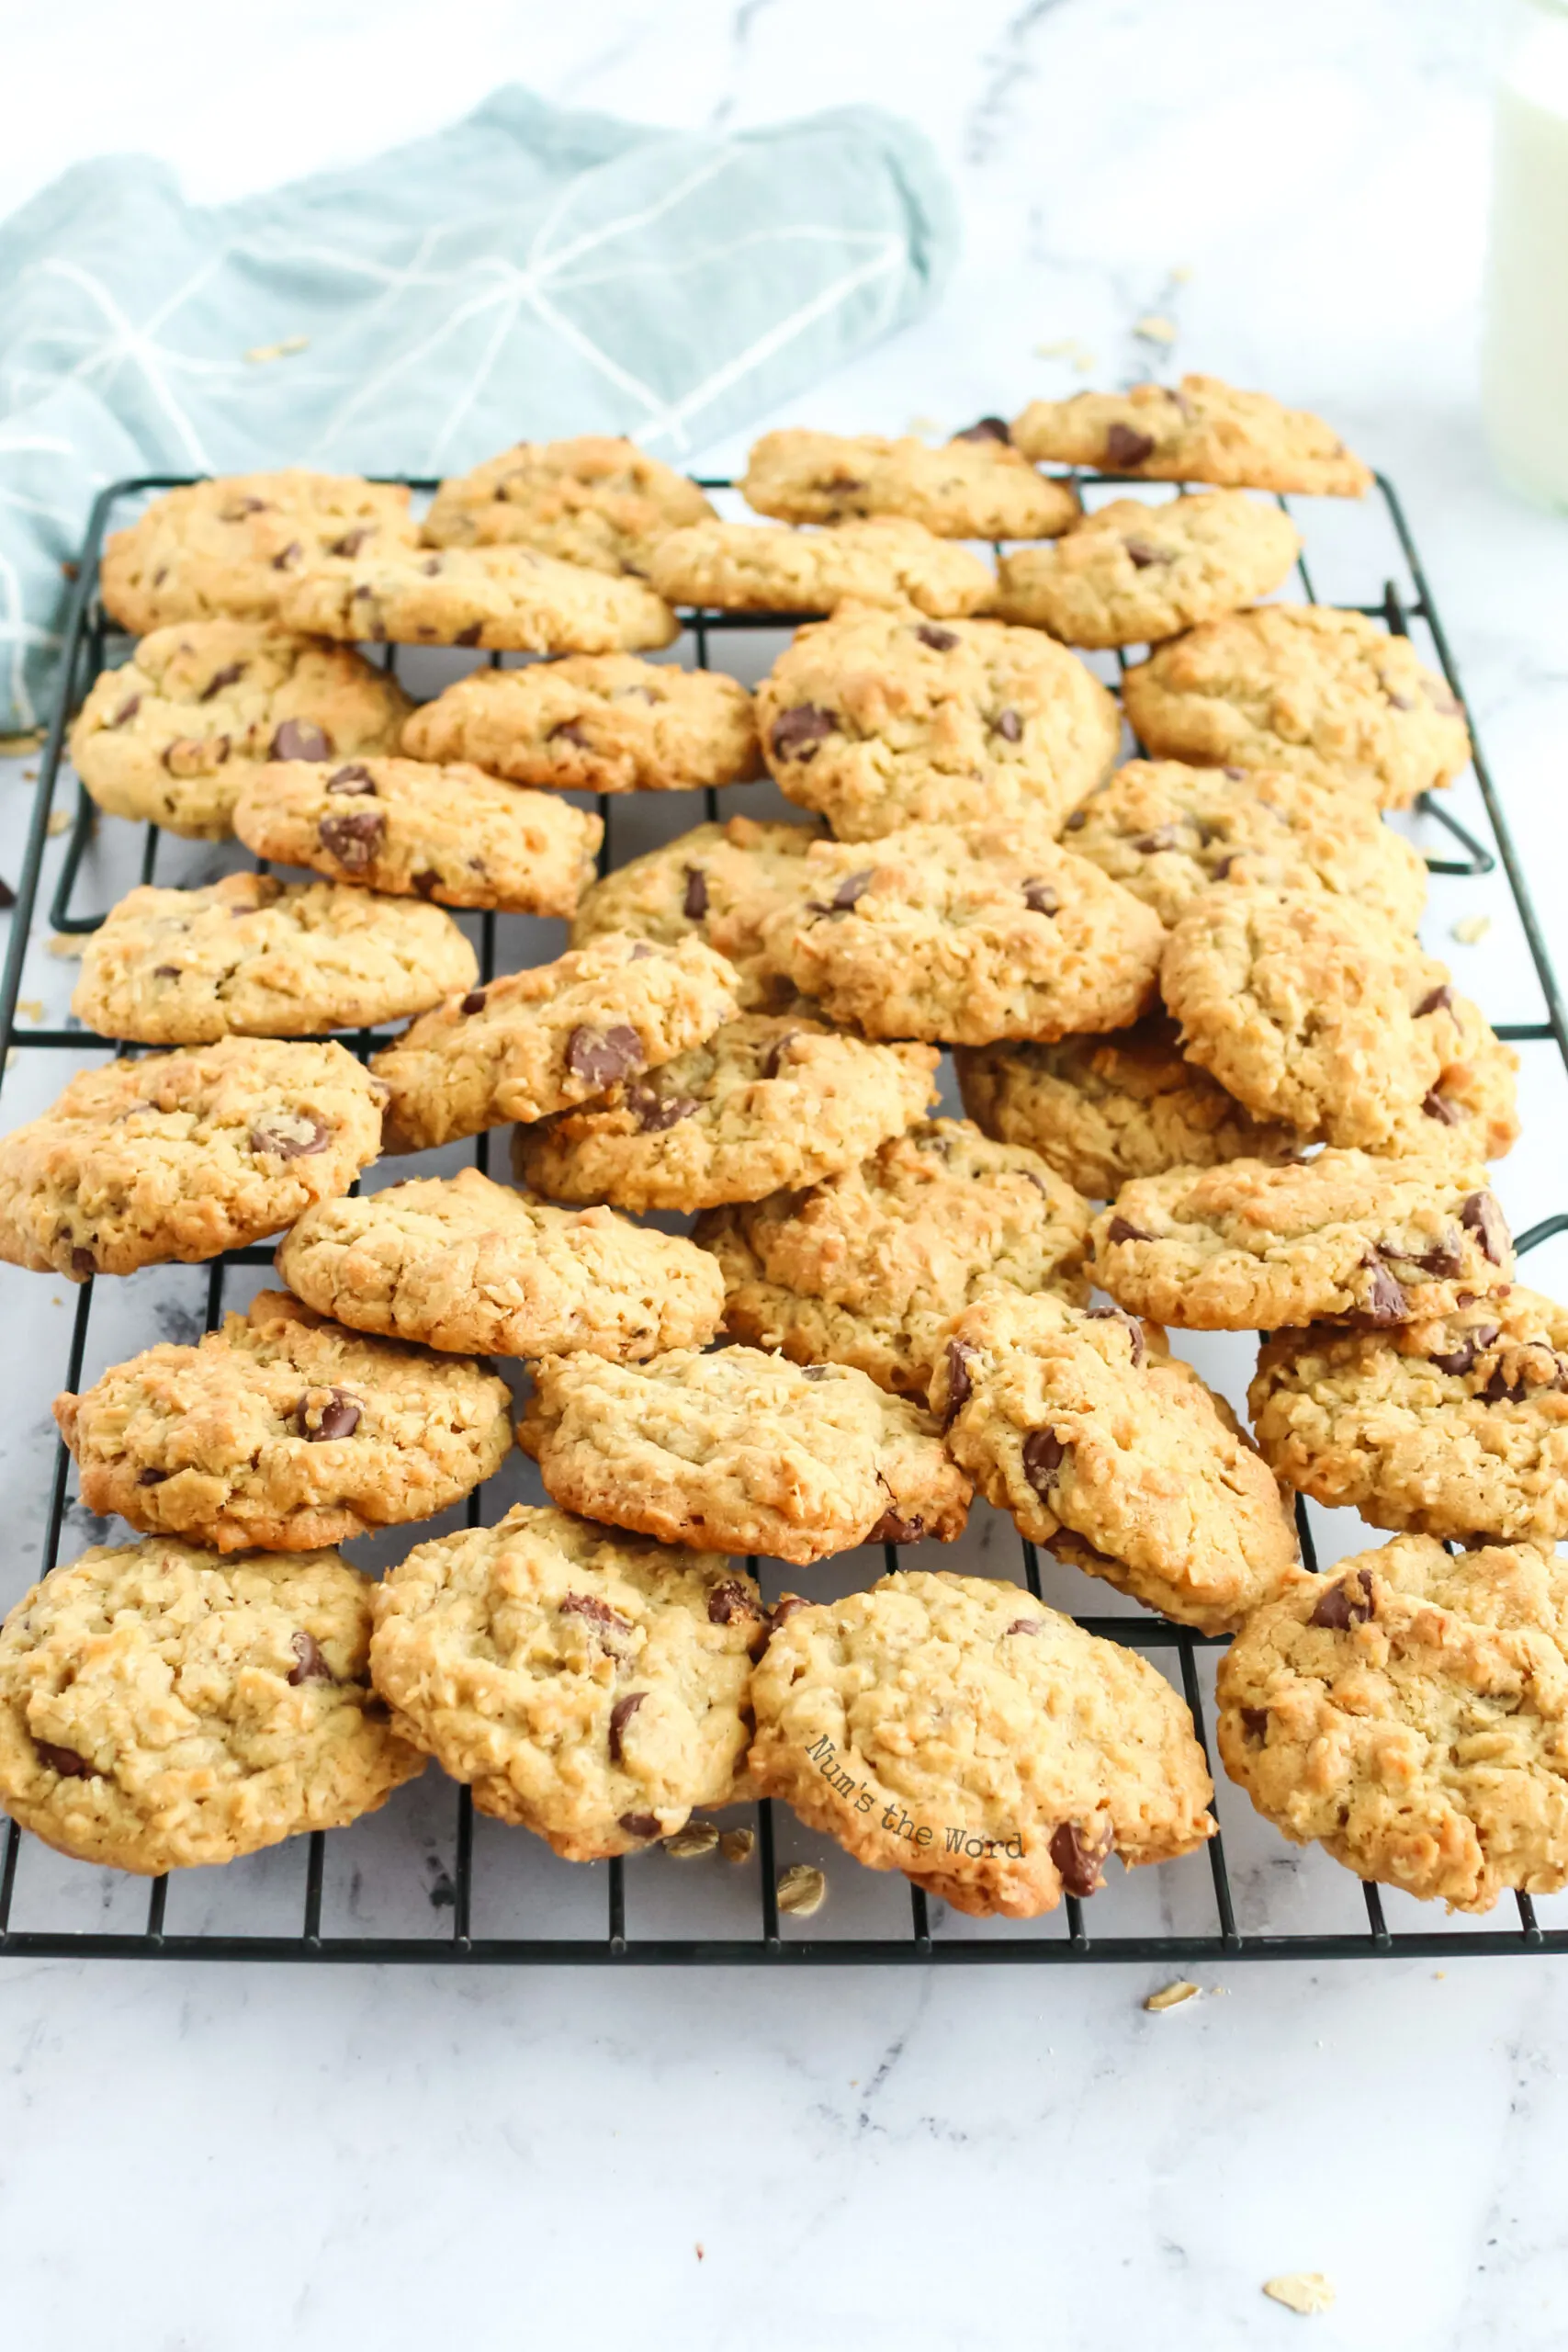 zoomed out image of a pile of cookies on a cooling rack.